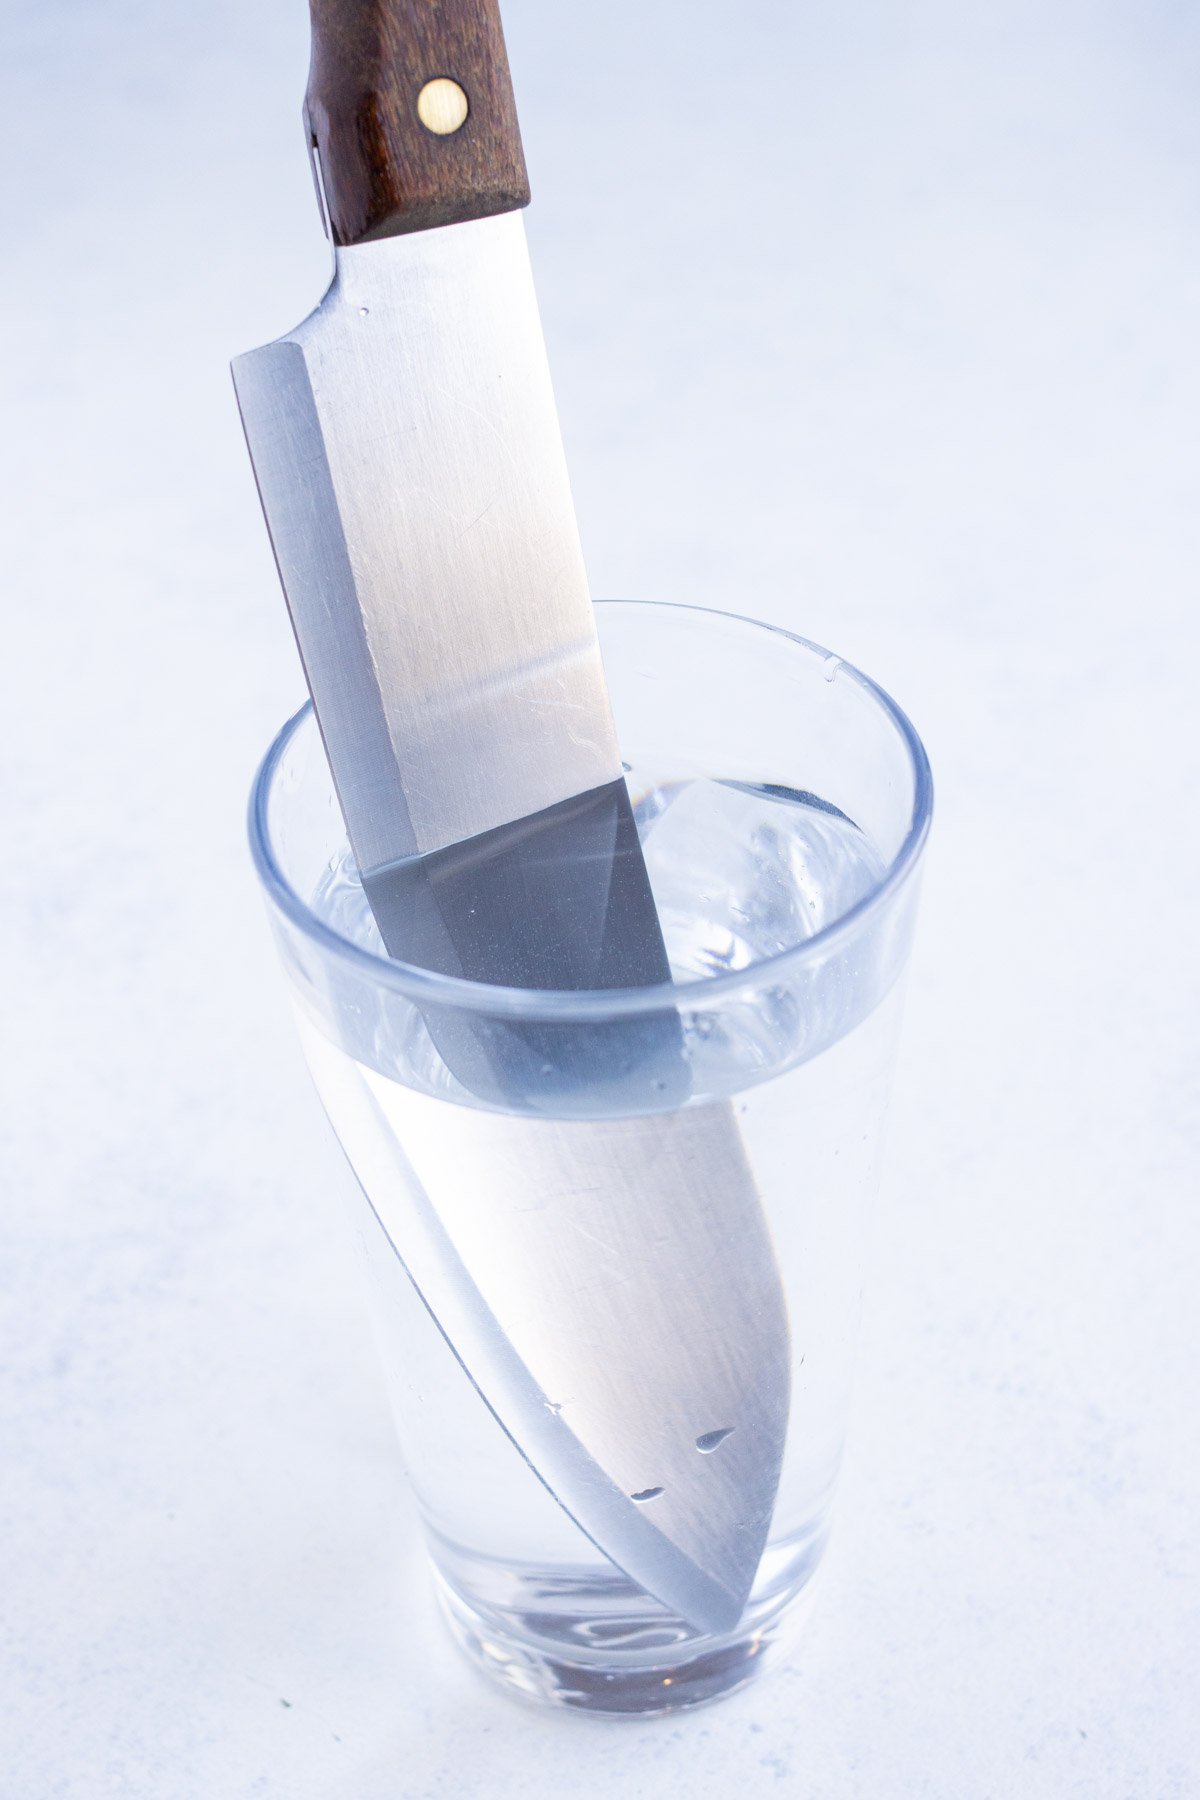 Knife is dipped into water.